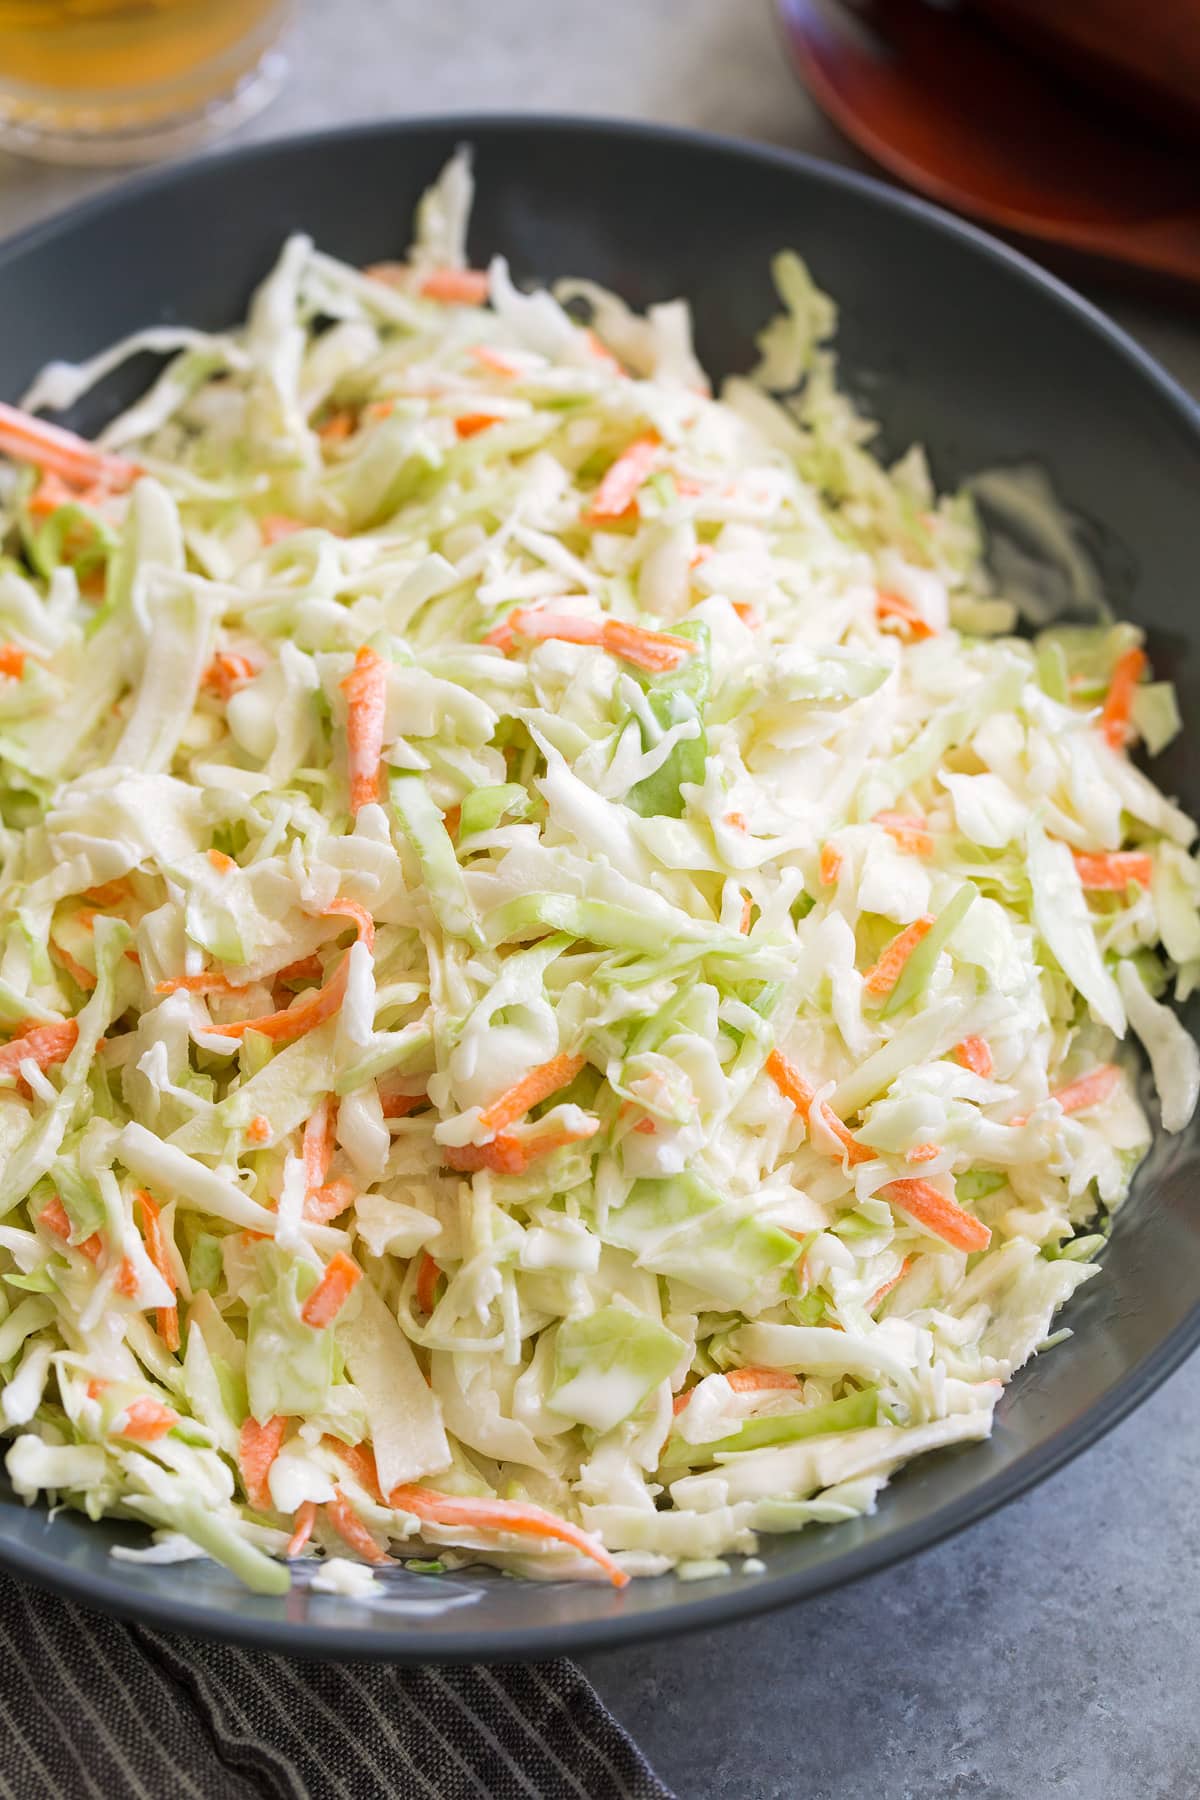 Coleslaw Recipe {Only 4 Ingredients!} - Cooking Classy